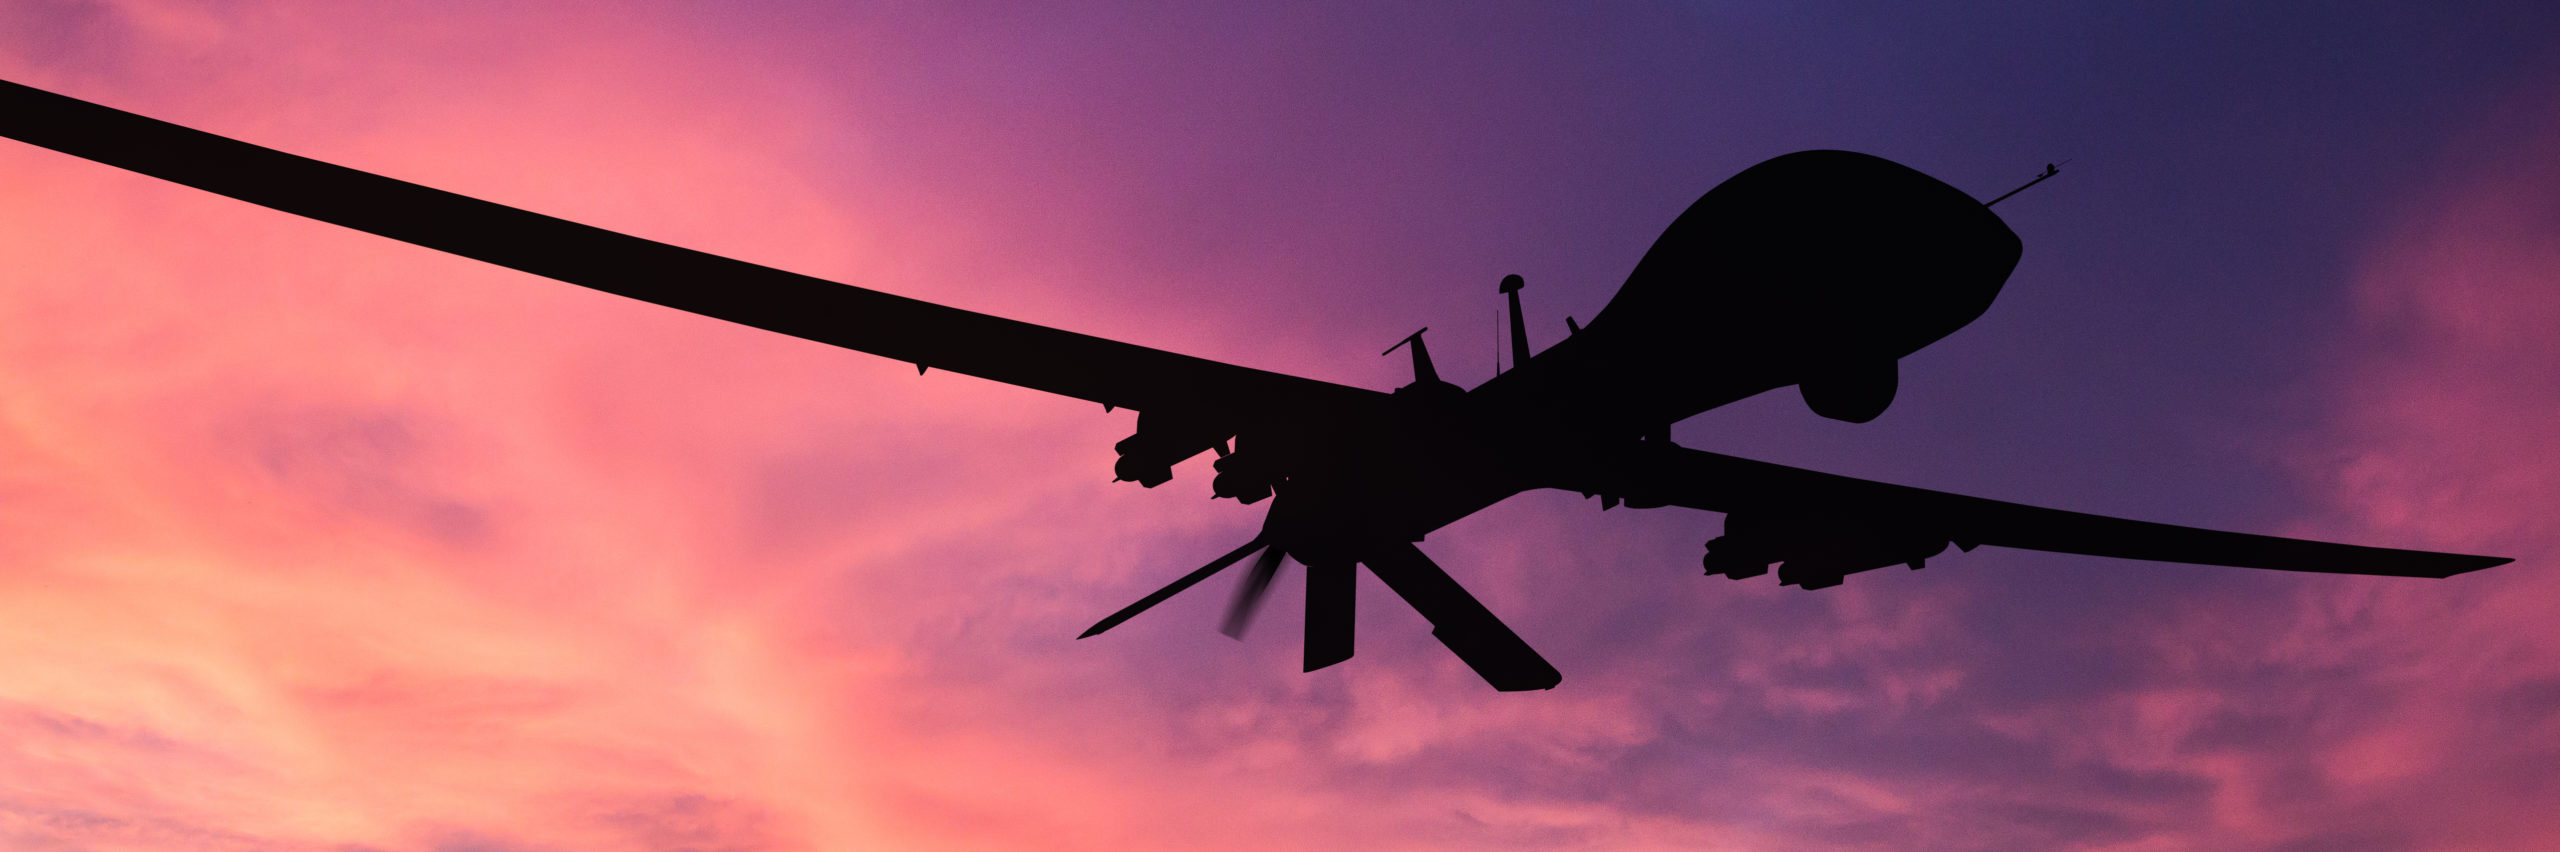 Military drone silhouette on sunset background. - Image [shutterstock]